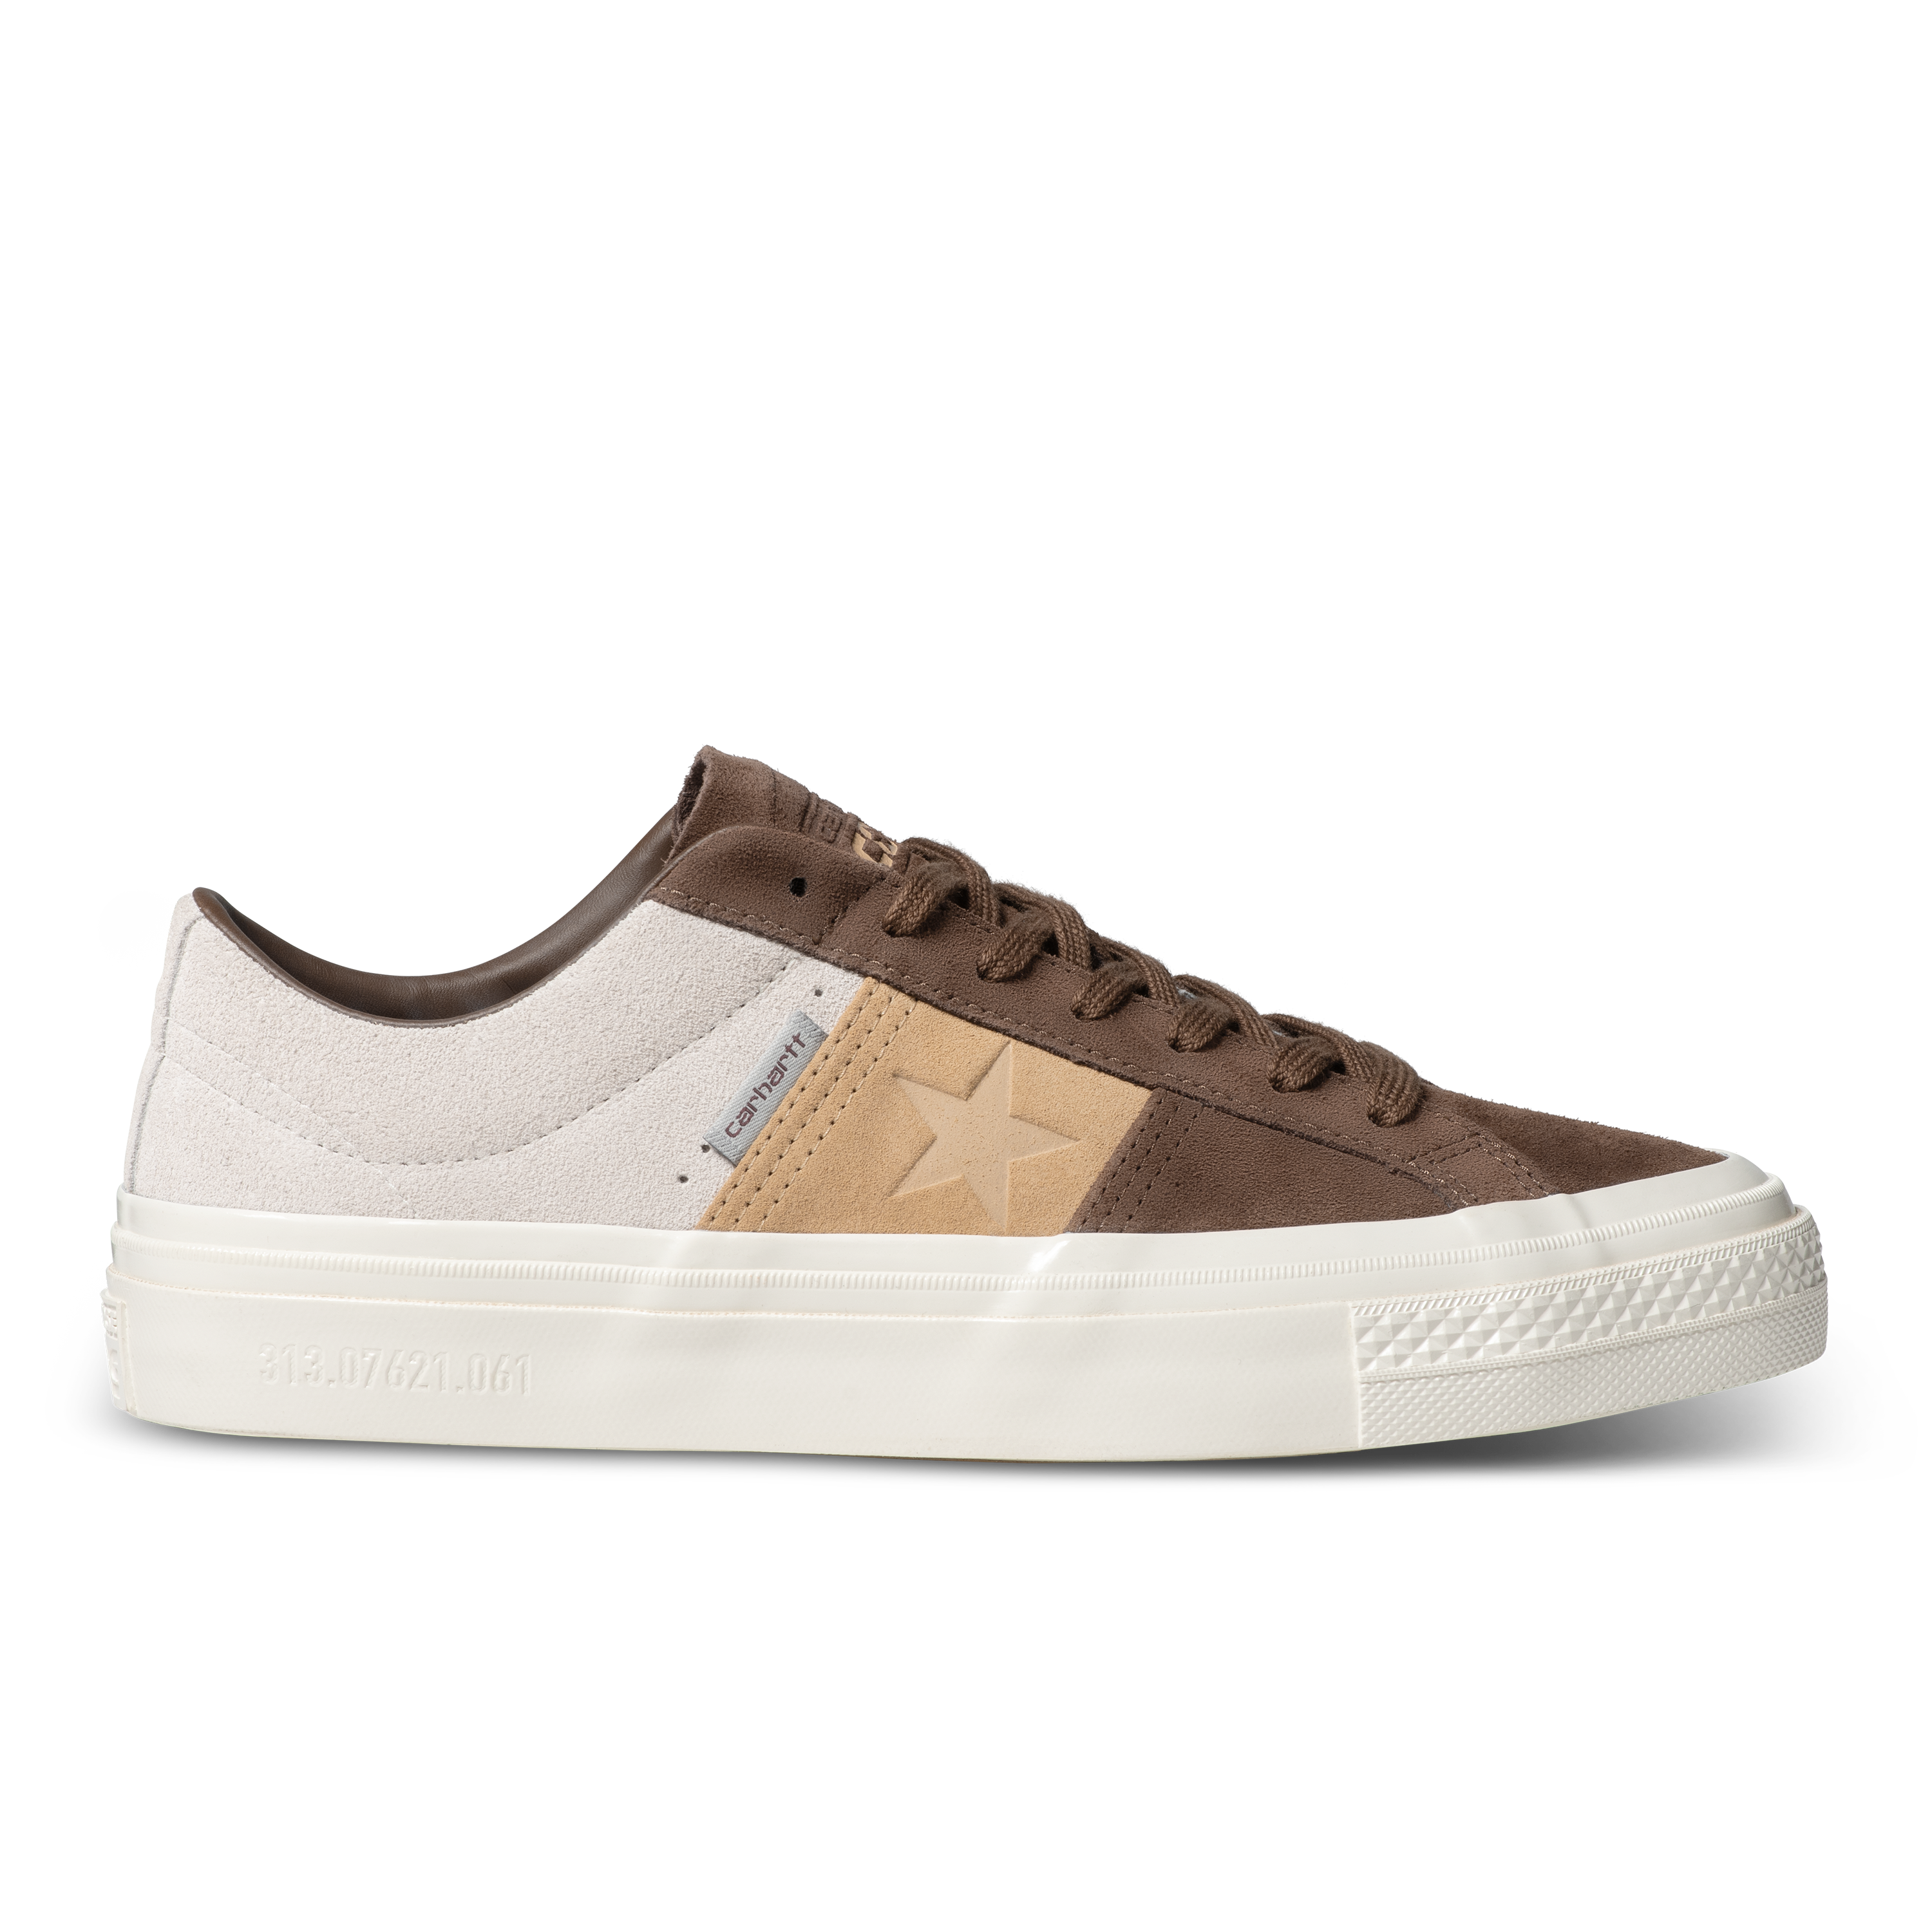 Carhartt WIP Converse CONS x Carhartt WIP One Star Academy Pro in Brown